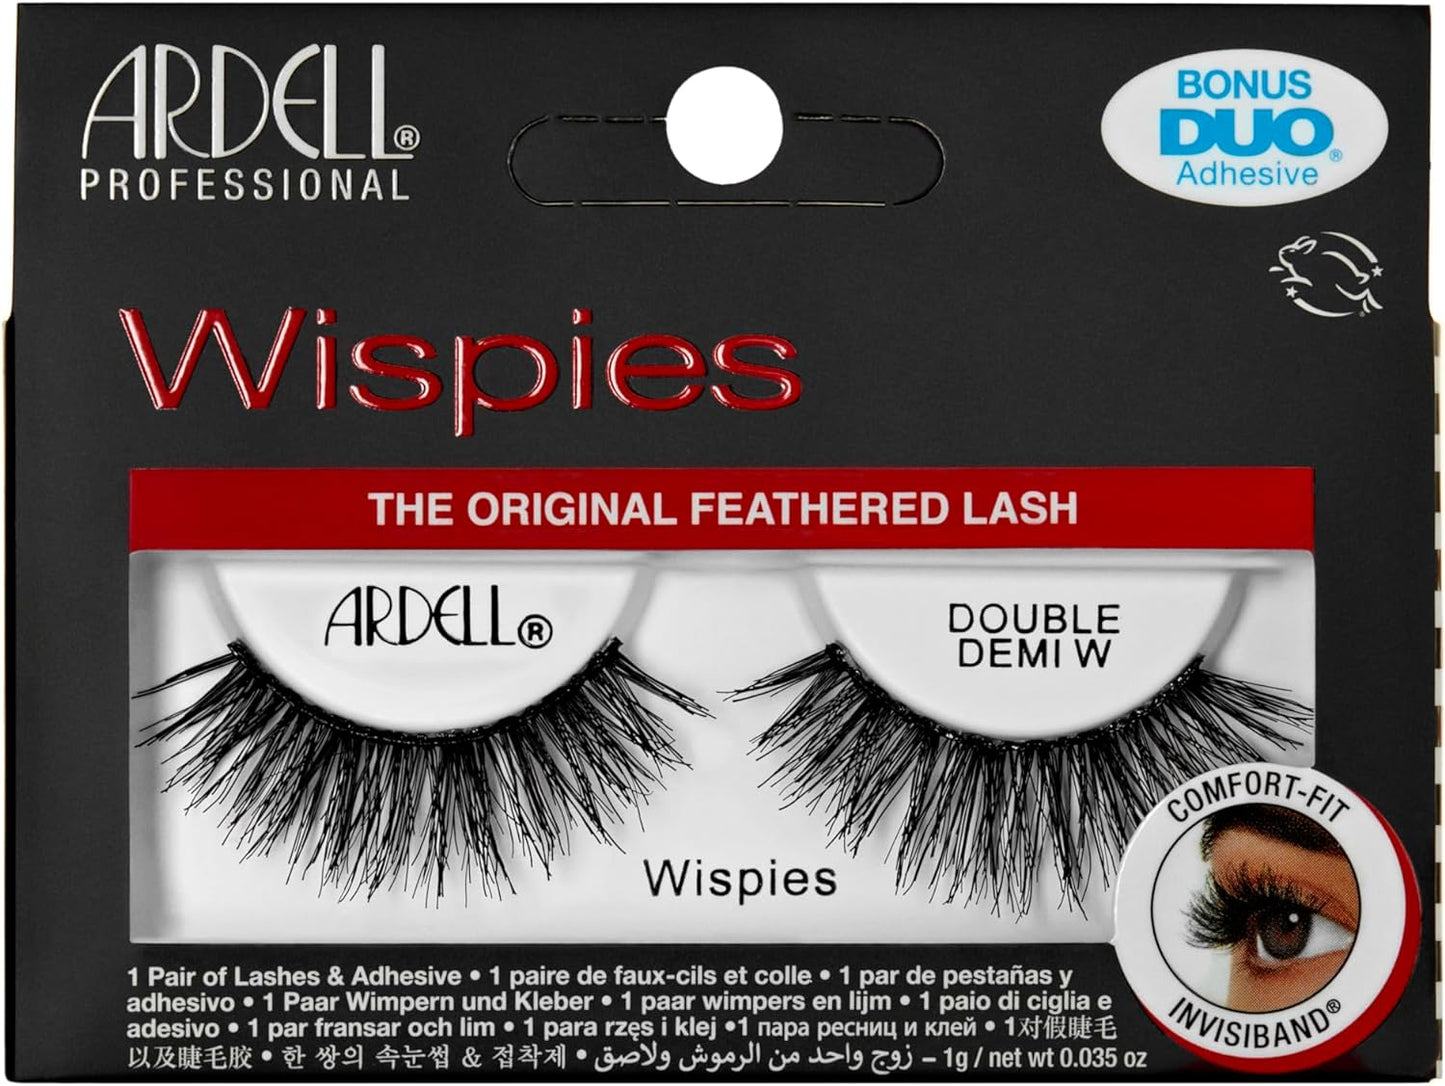 Ardell Double Demi Wispies False Eyelashes, Duo Adhesive Included, Full Volume Medium Length, Vegan Friendly, 1 Pair (Pack of 1)